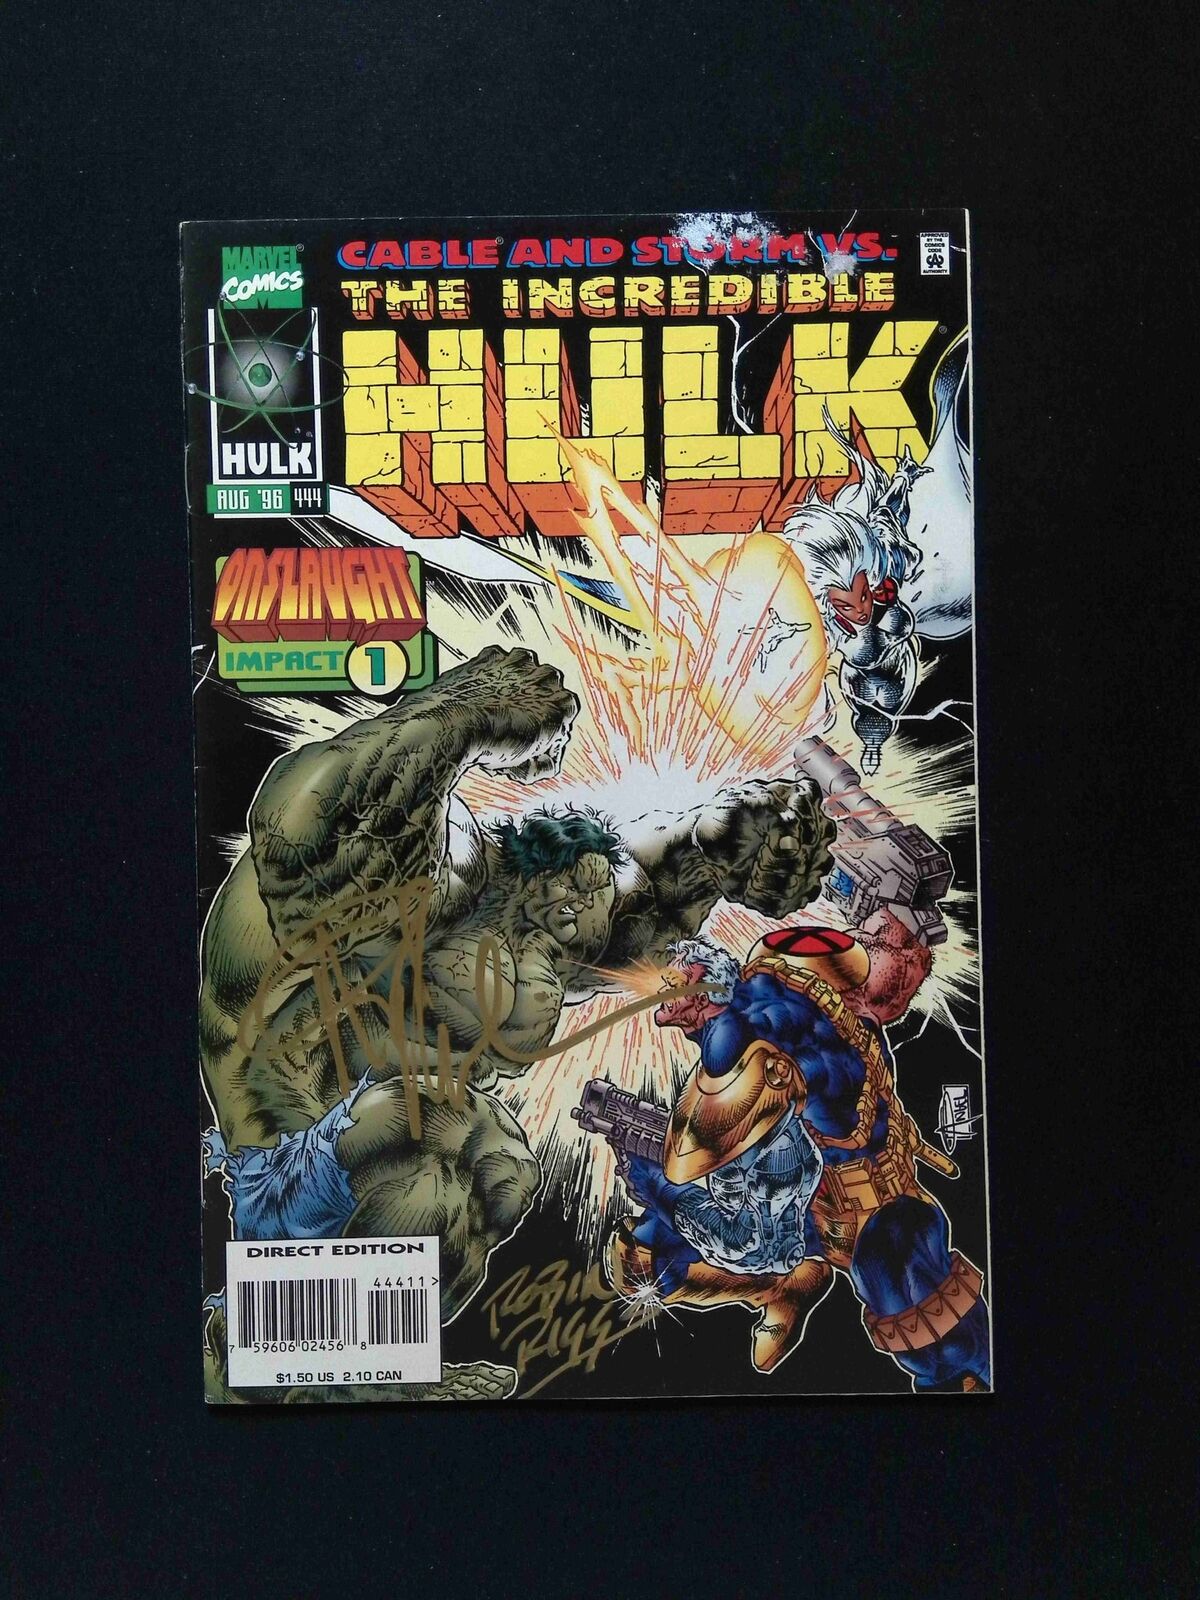 Incredible Hulk #444  MARVEL 1996 FN/VF  SIGNED BY RIGGS AND MEDINA